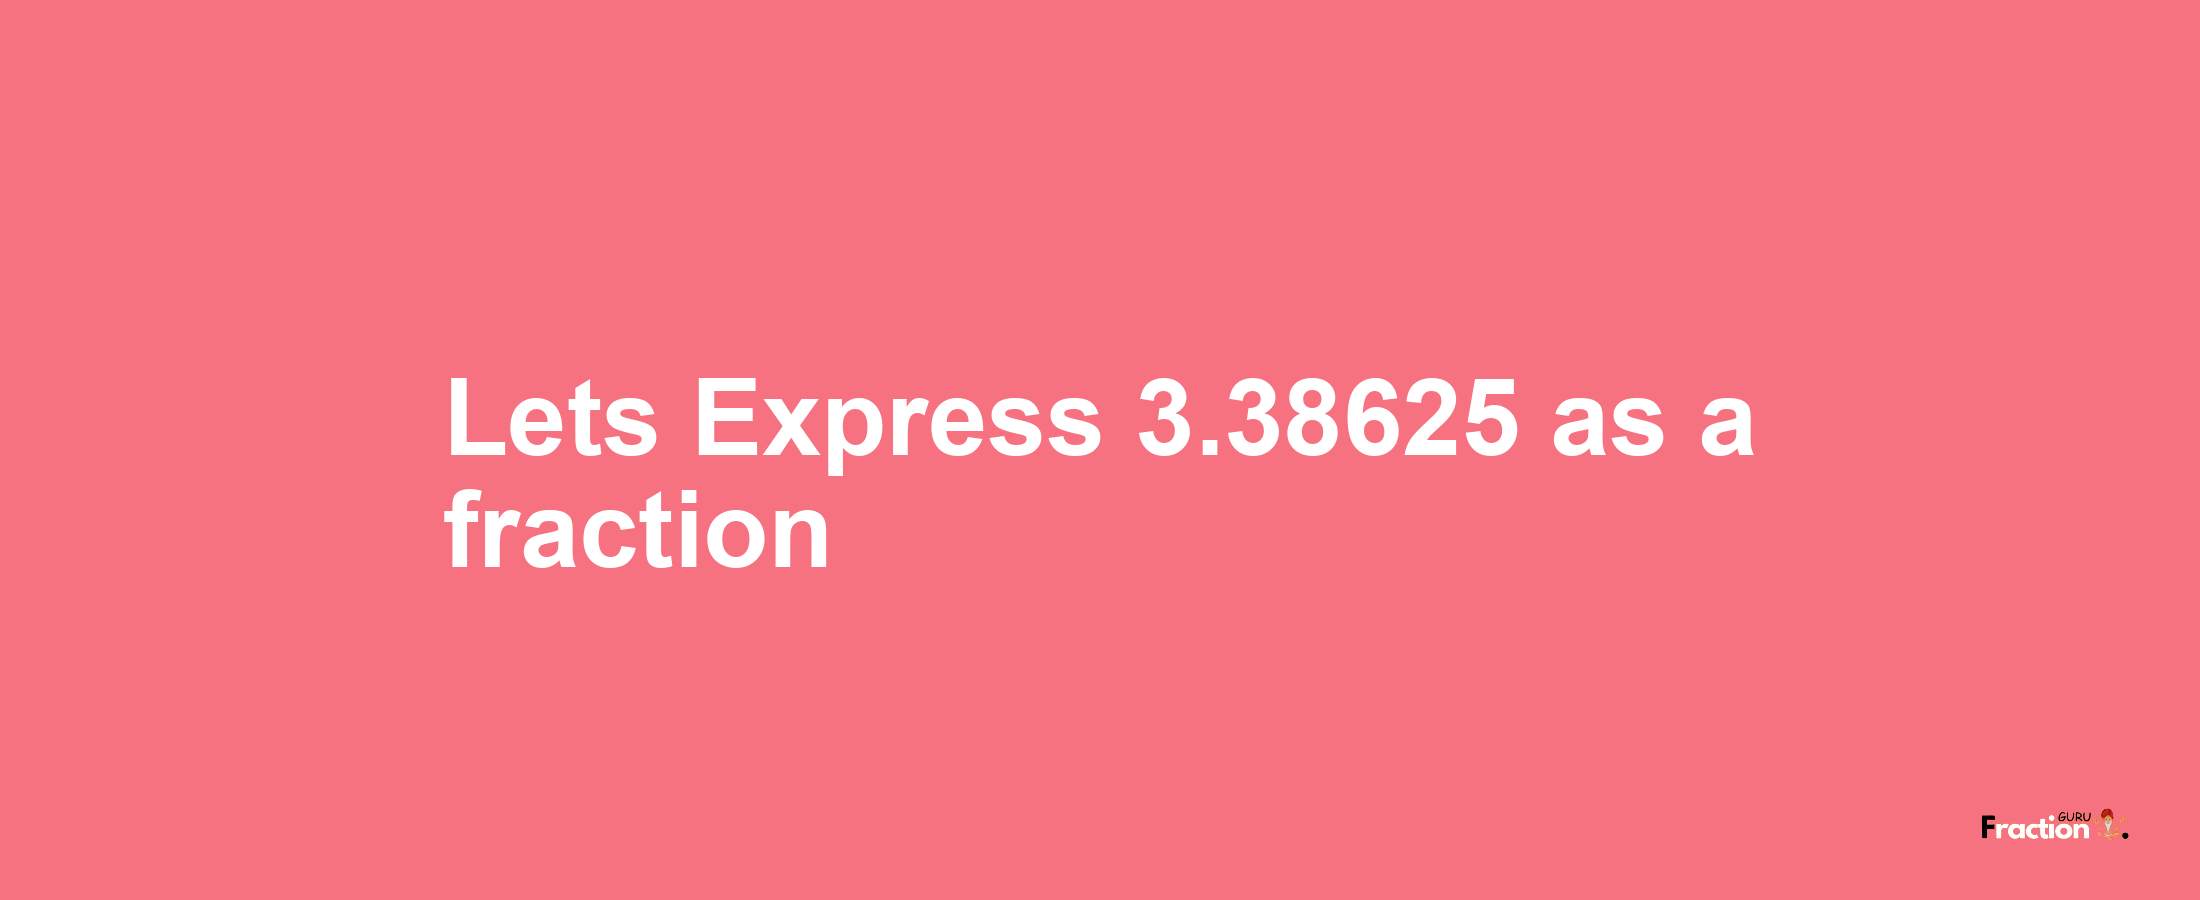 Lets Express 3.38625 as afraction